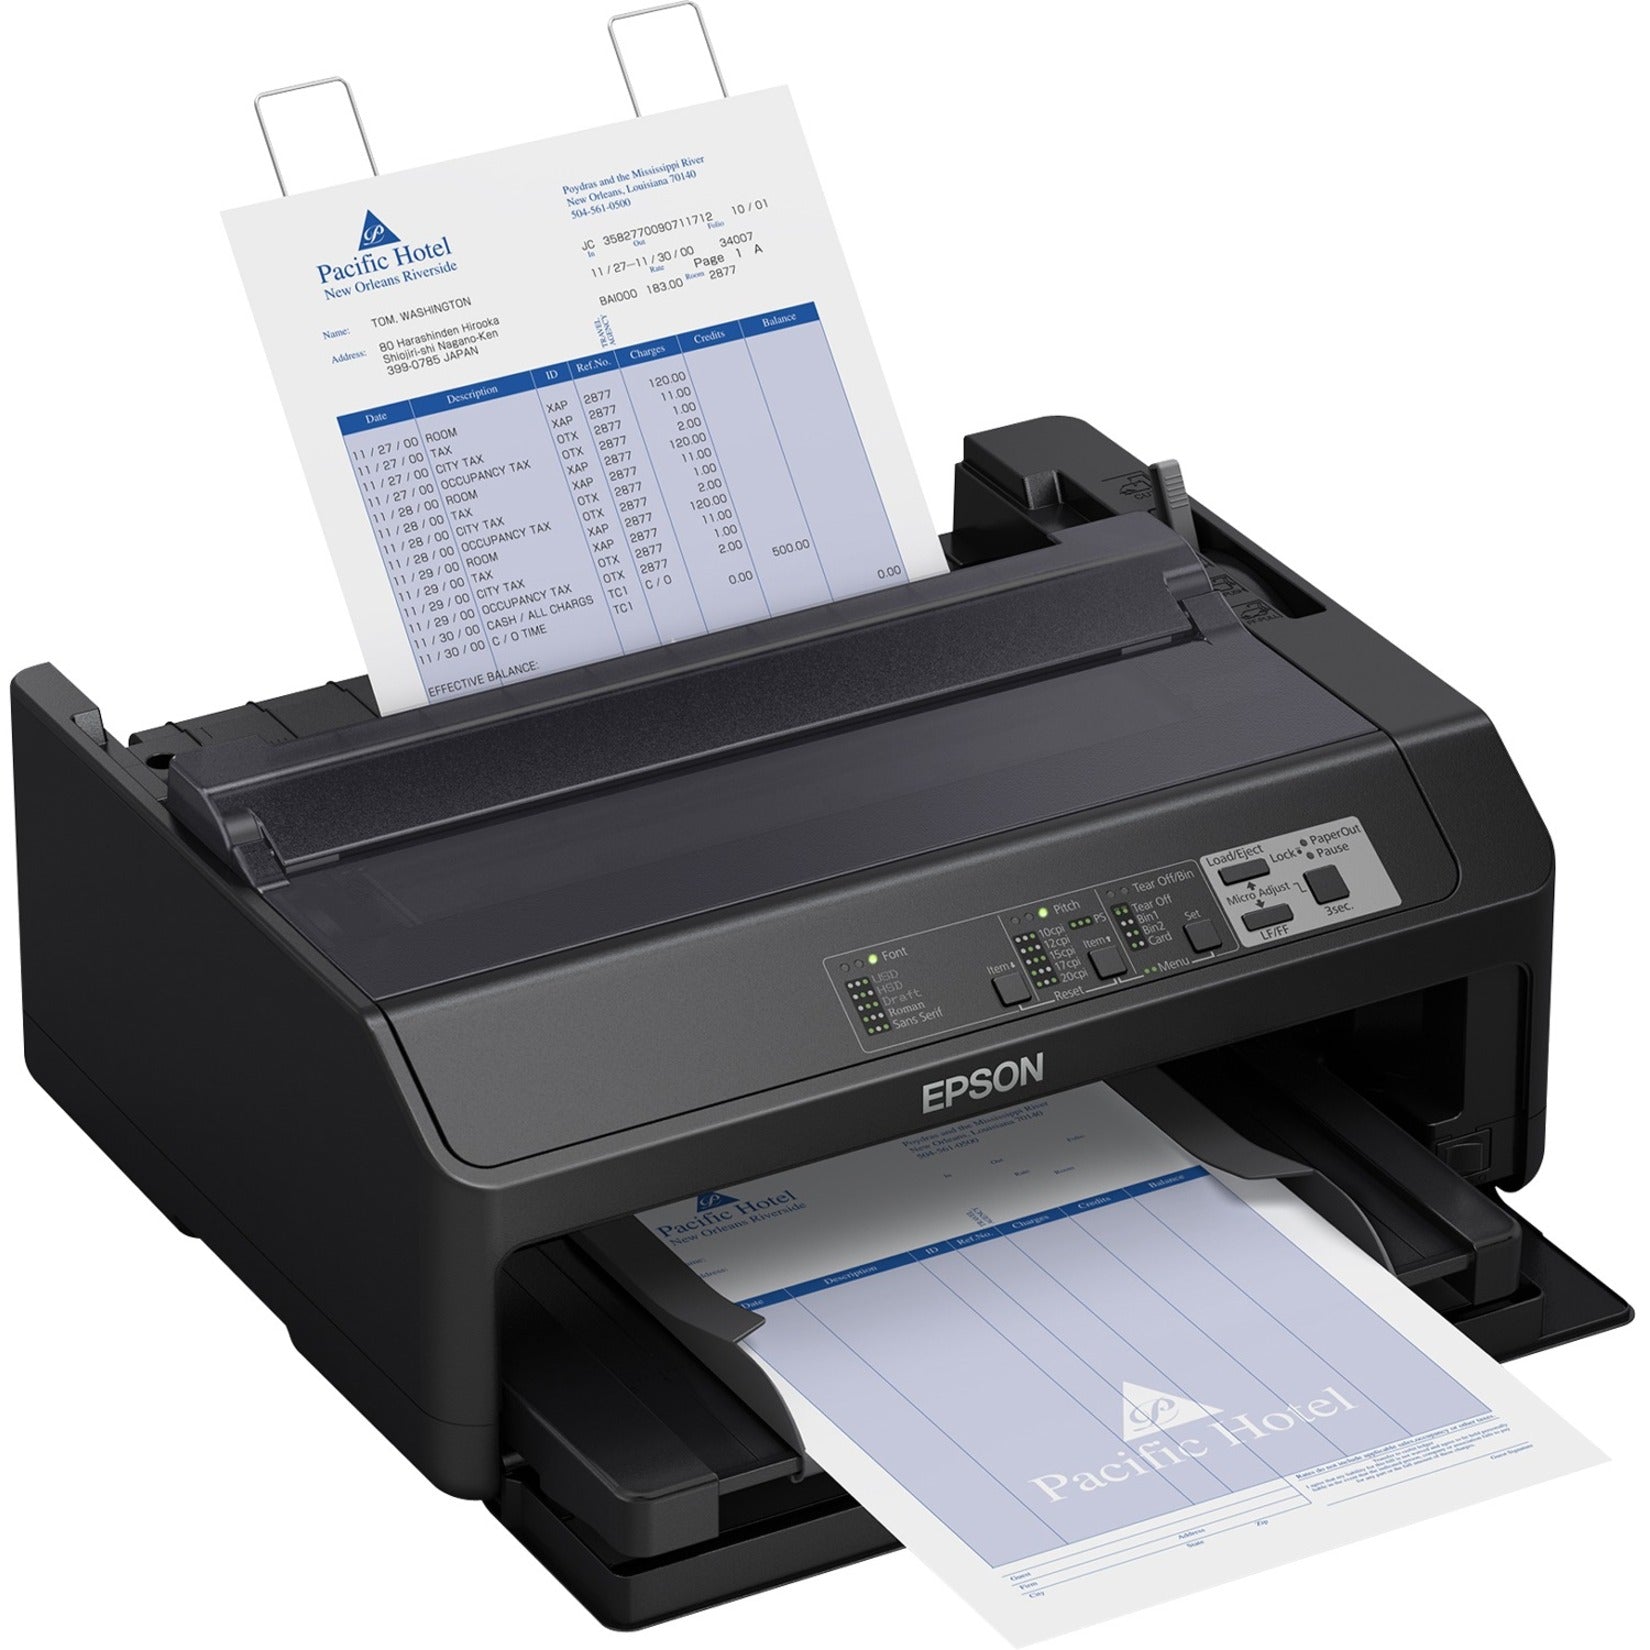 Epson C11CF37202 FX-890II Impact Printer, Durable and Easy to Use, 3-Year Warranty, High-Speed Printing